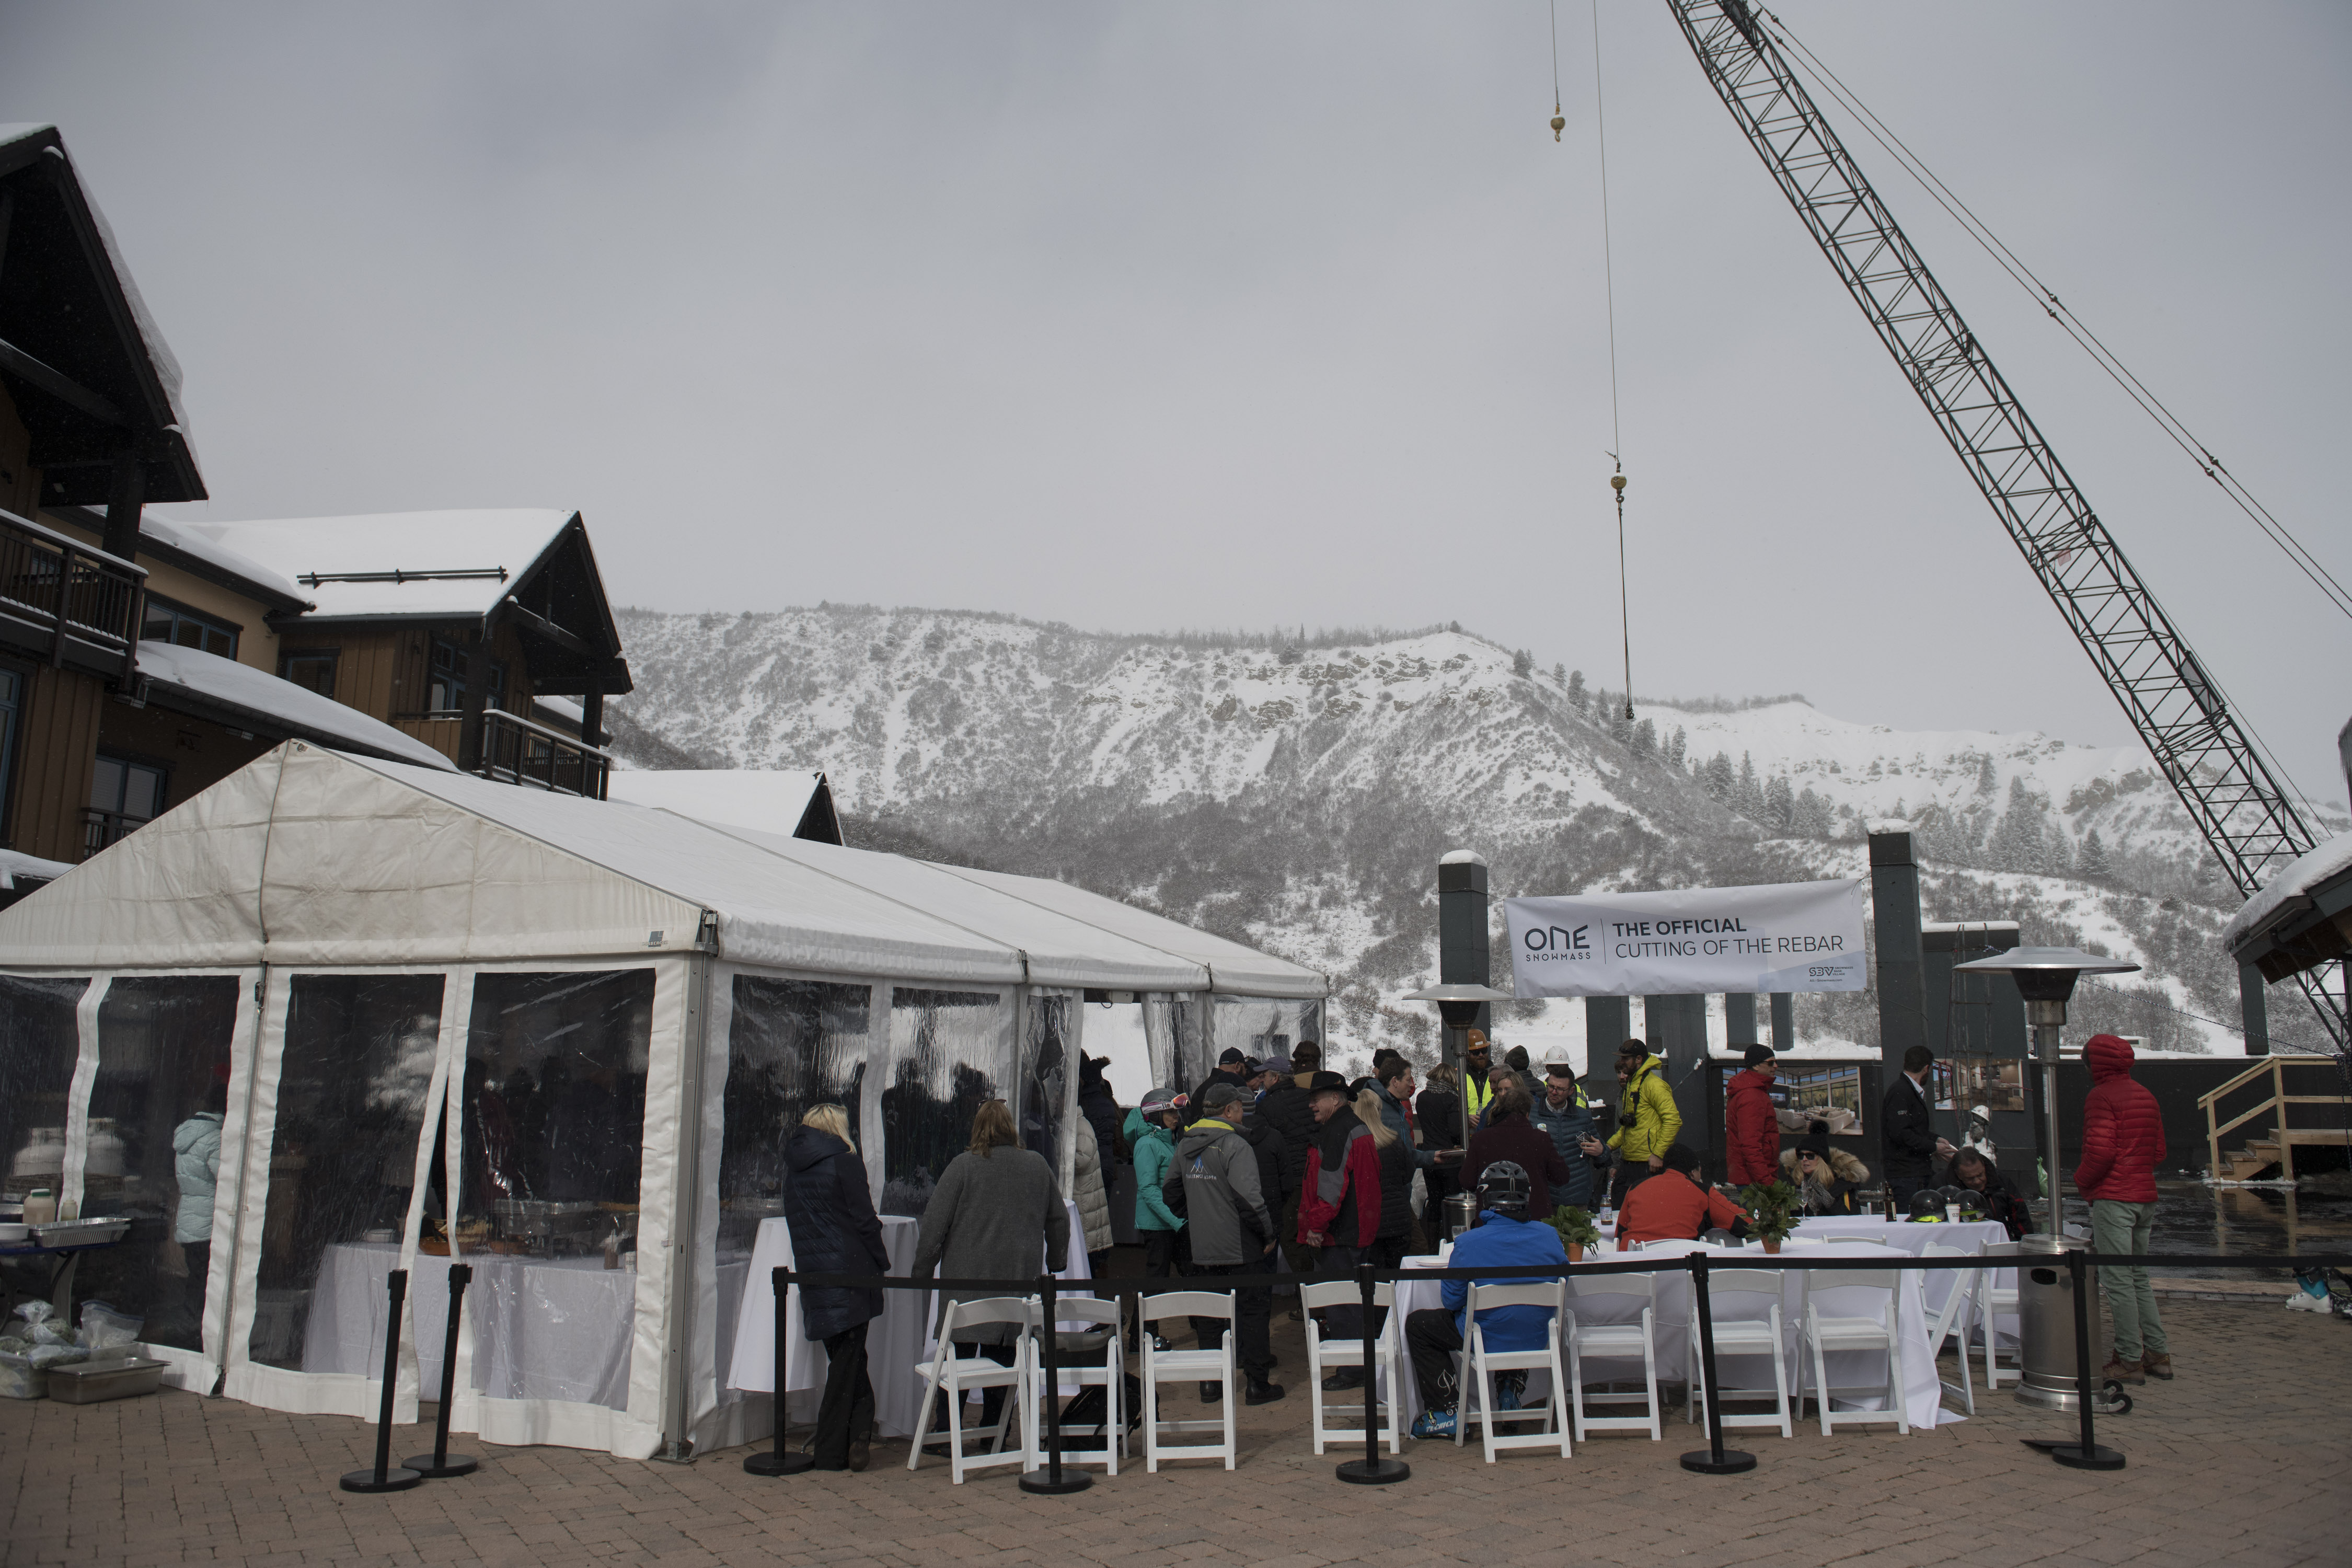 Over 70 community members celebrated the start of the construction on One Snowmass – the latest project underway now at Snowmass Base Village.